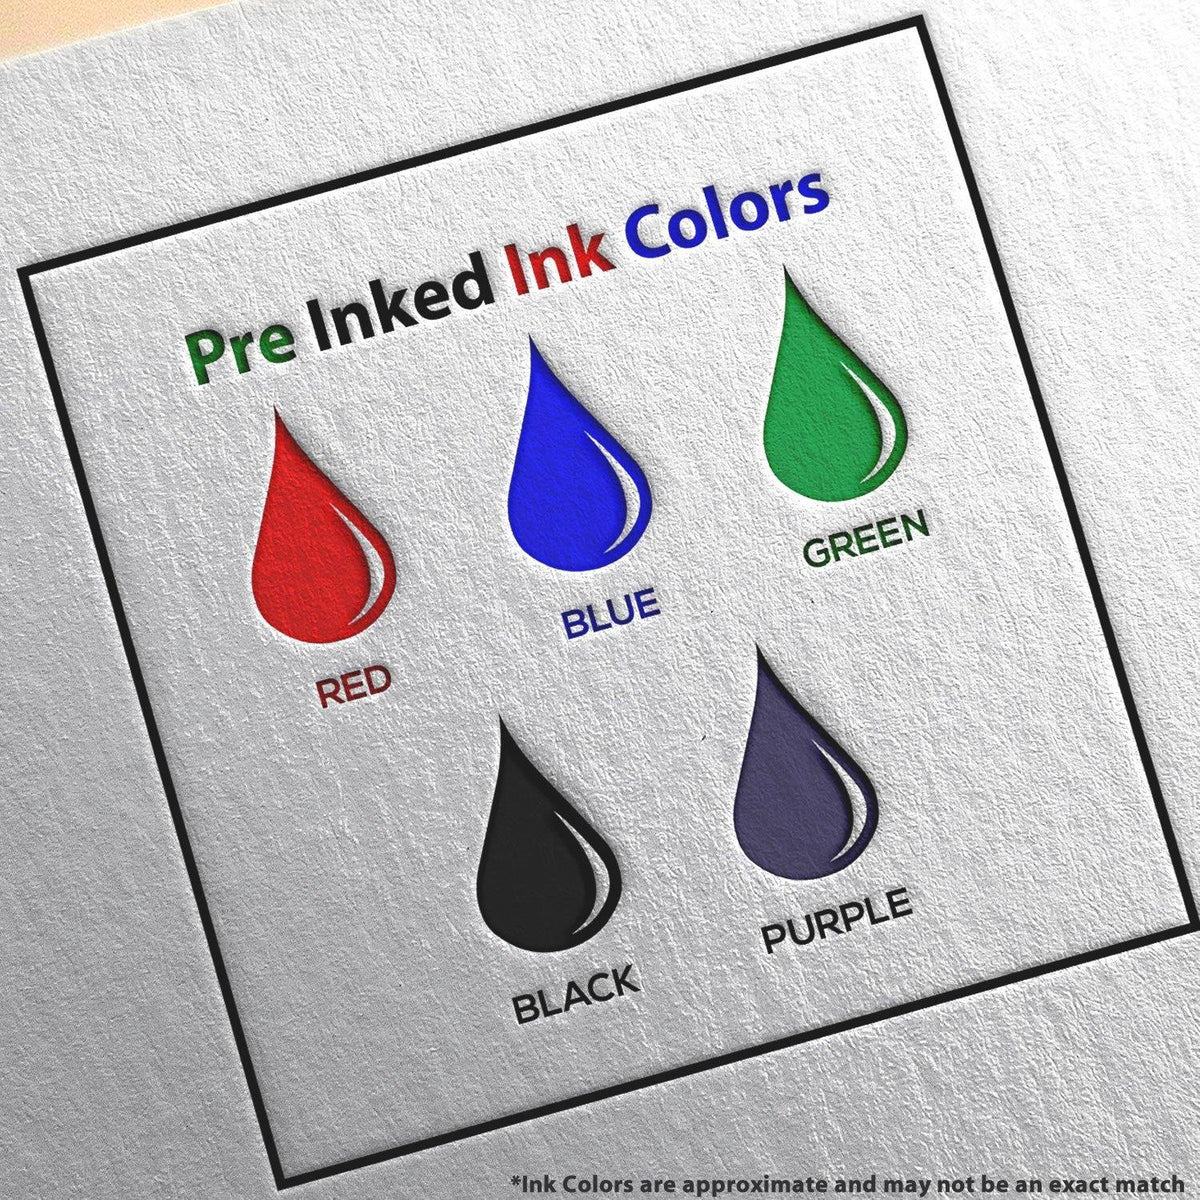 Large Pre-Inked Skinny To the Parents of Stamp Ink Color Options